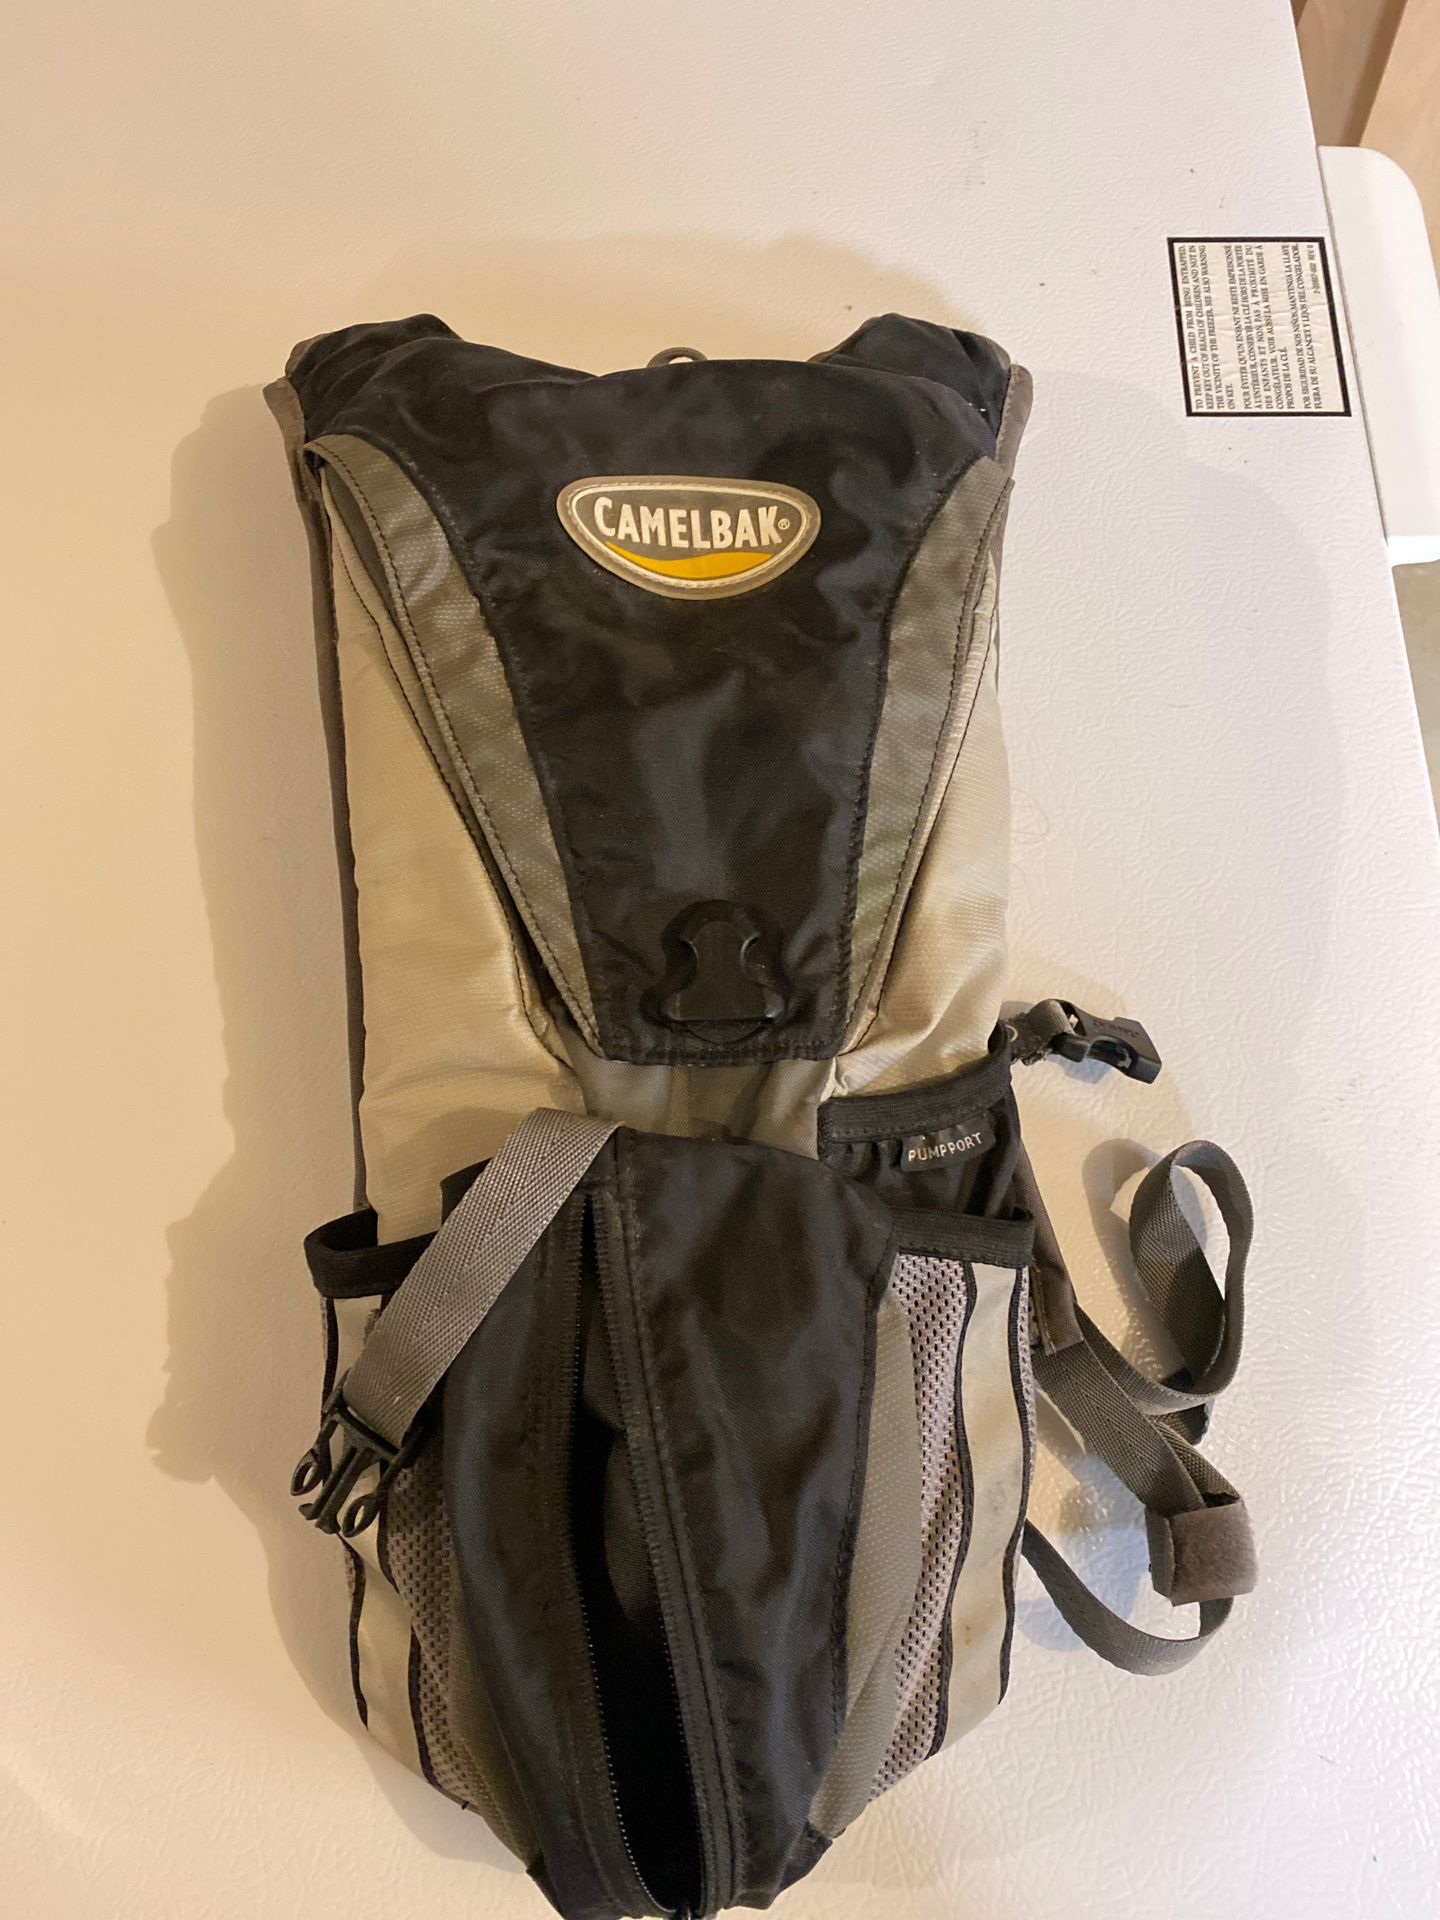 Camelback pack backpack no water res